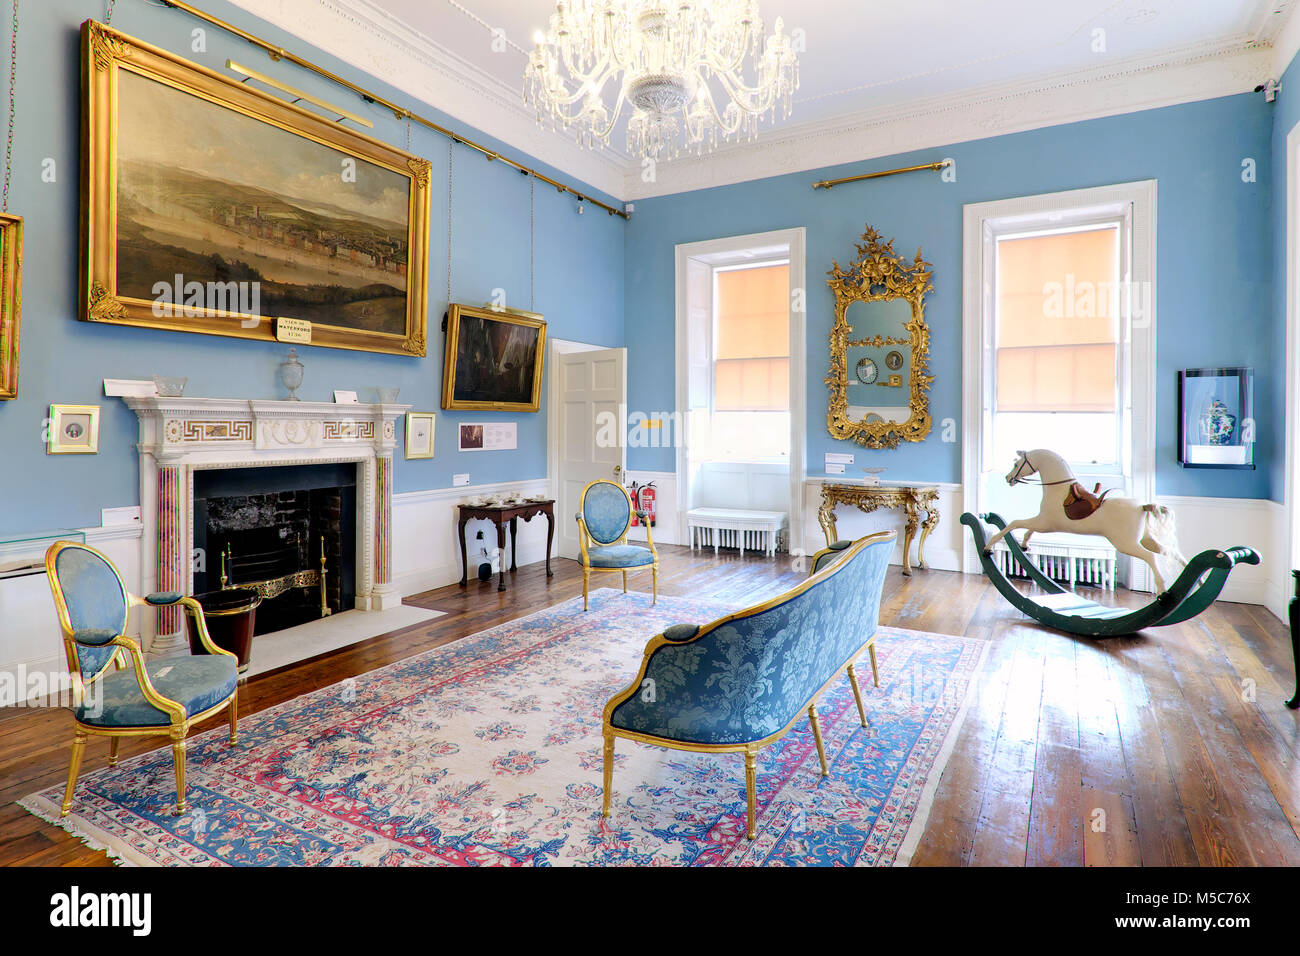 The drawing room with the large William Van der Hagen painting, Bishop's Palace - Treasures of Georgian Waterford, Waterford, Ireland Stock Photo